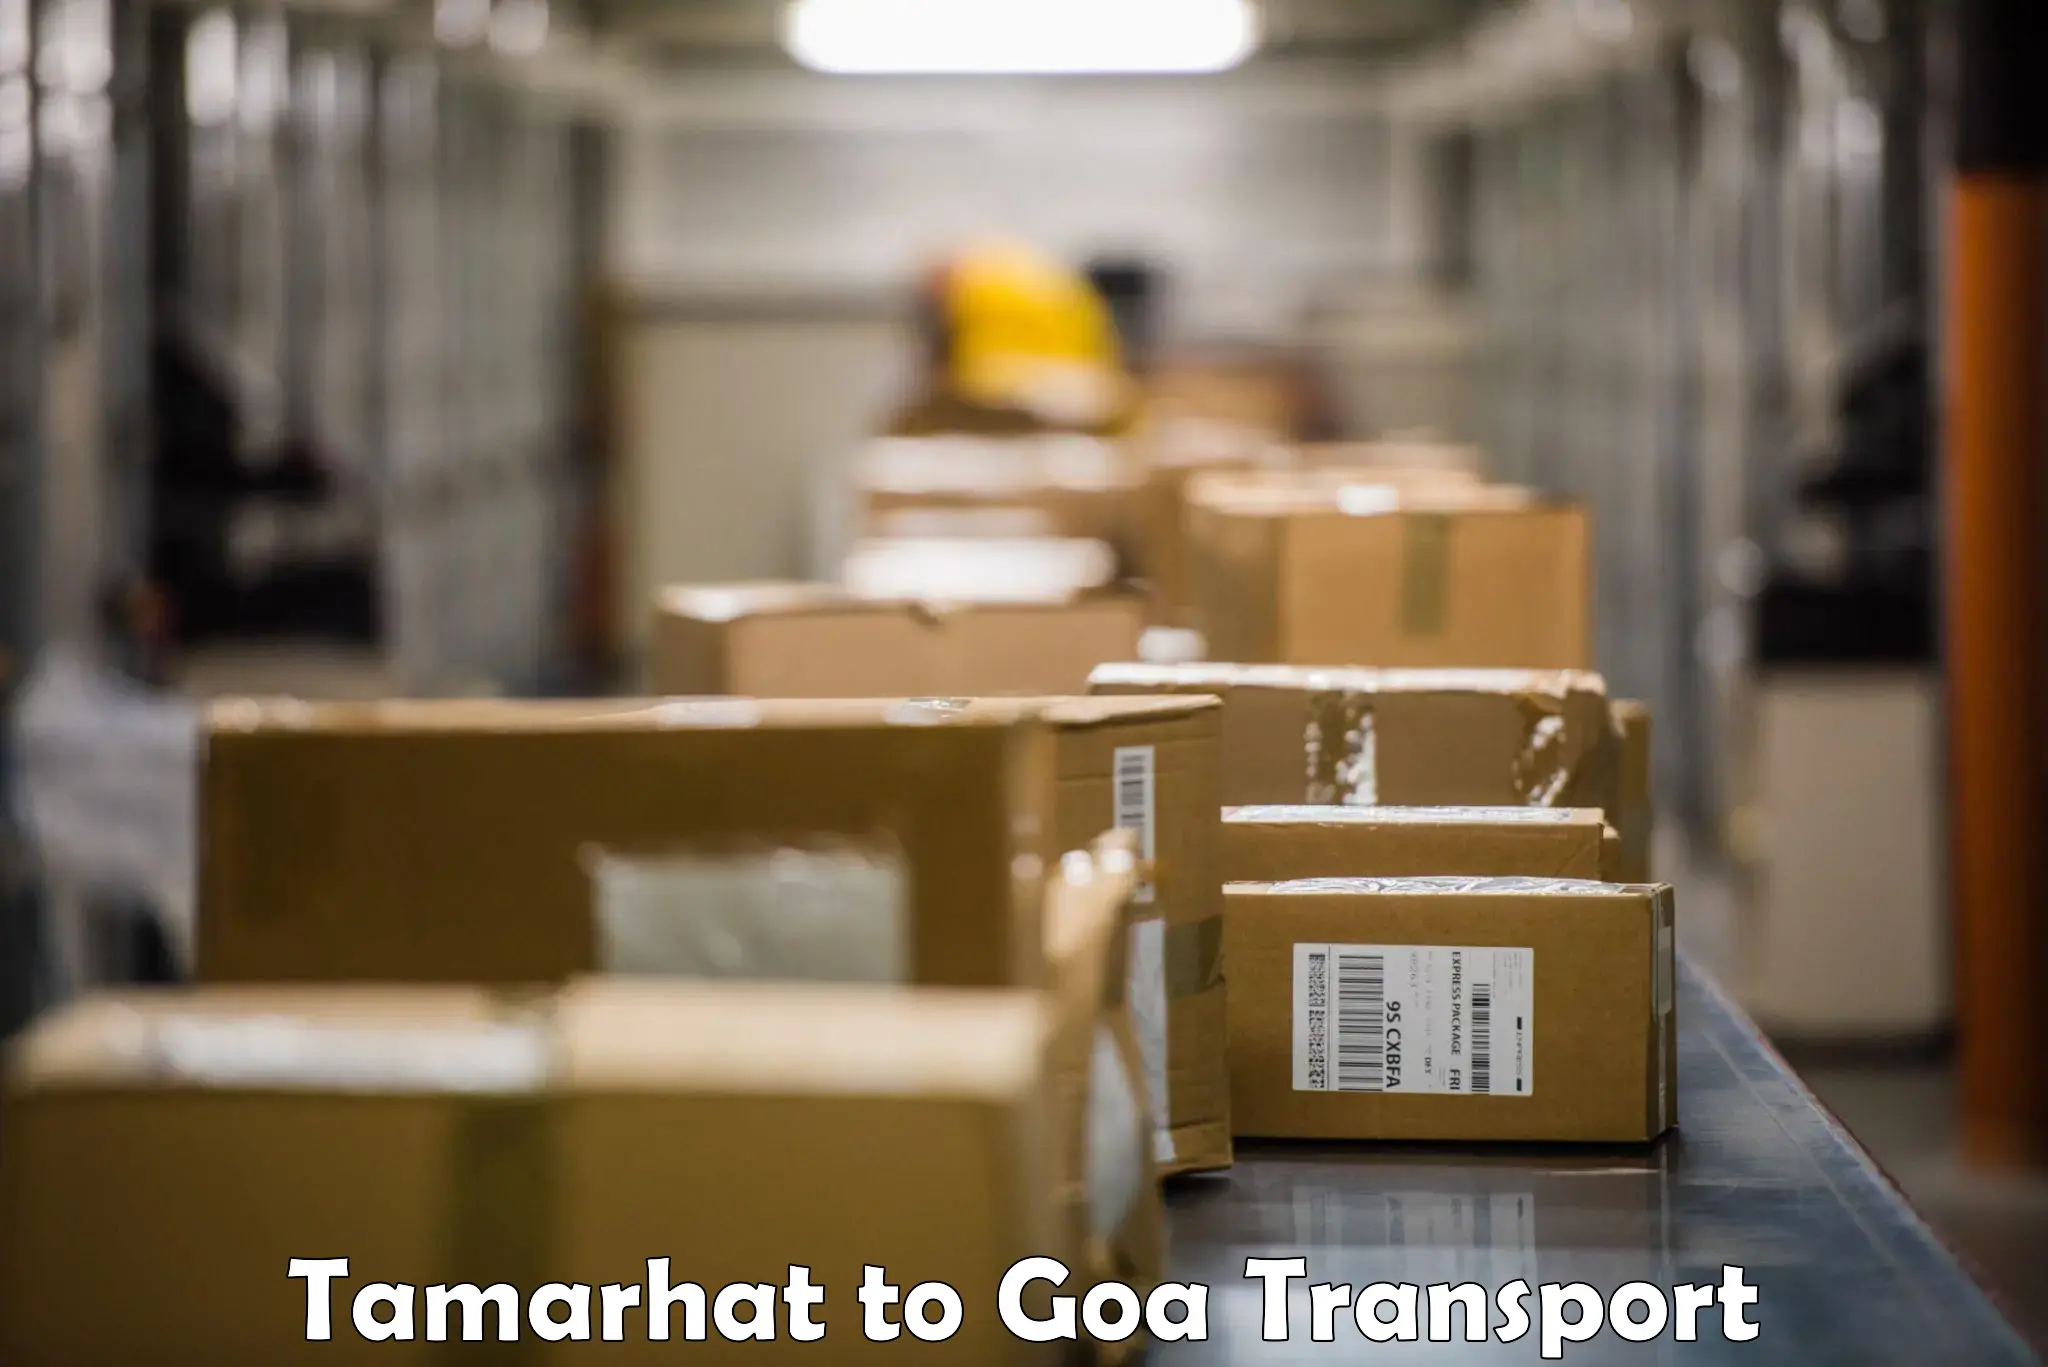 Daily parcel service transport Tamarhat to Goa